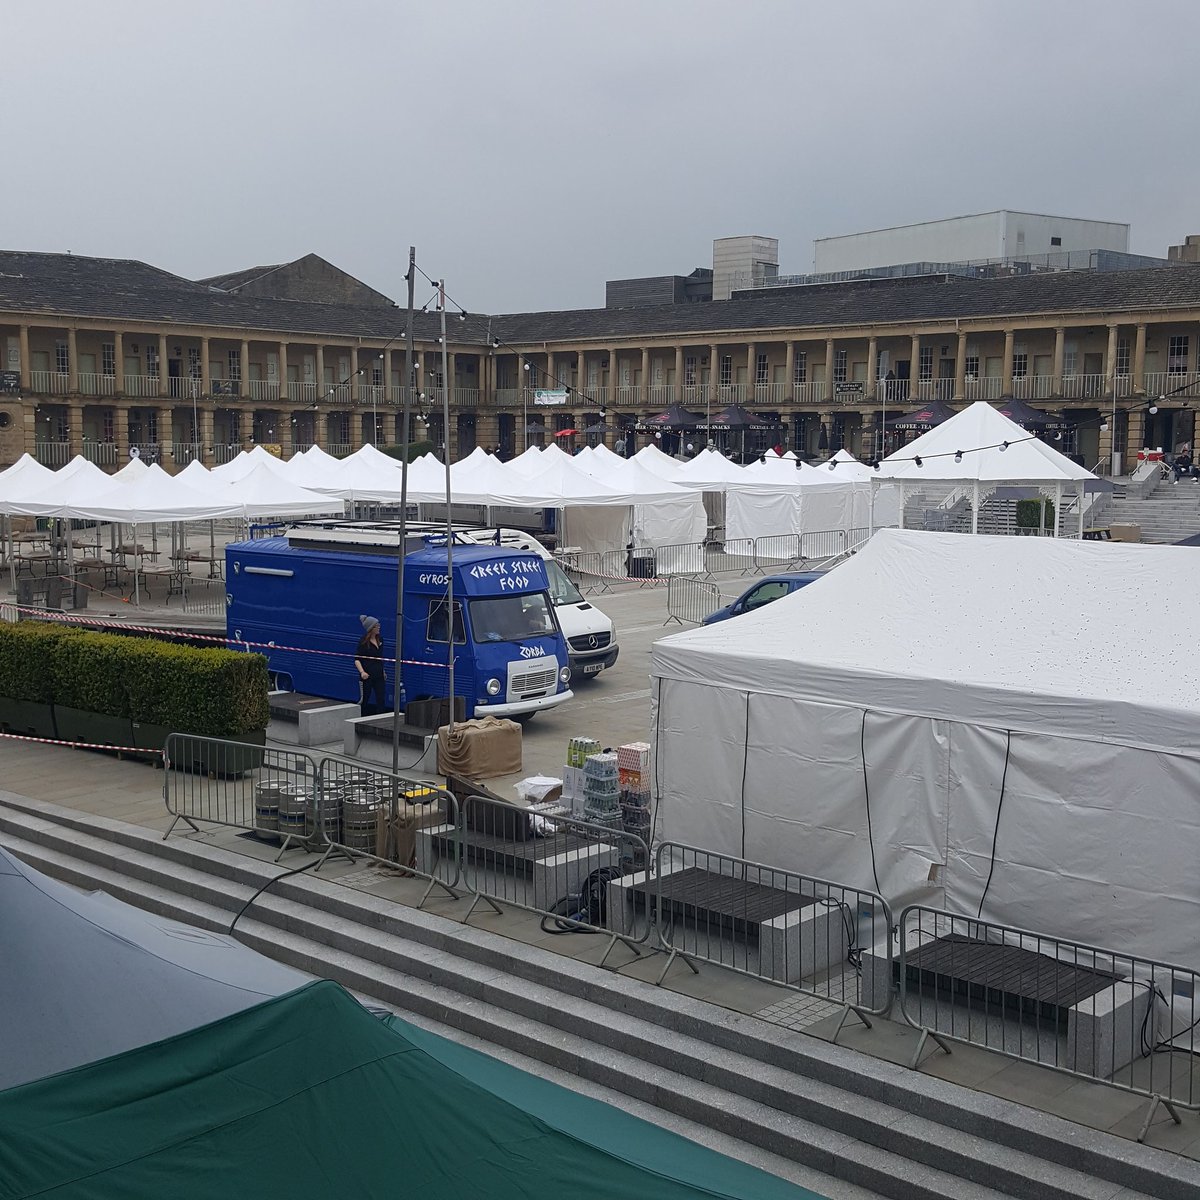 Here's @thepiecehall earlier today as #marketstalls and yummy foodie vans started arriving. Its been a #fabulous week, thank you to everyone who has been in, looking forward to an #excellent market filled, sunshine blessed, Bank Holiday weekend ☀️👍❤️